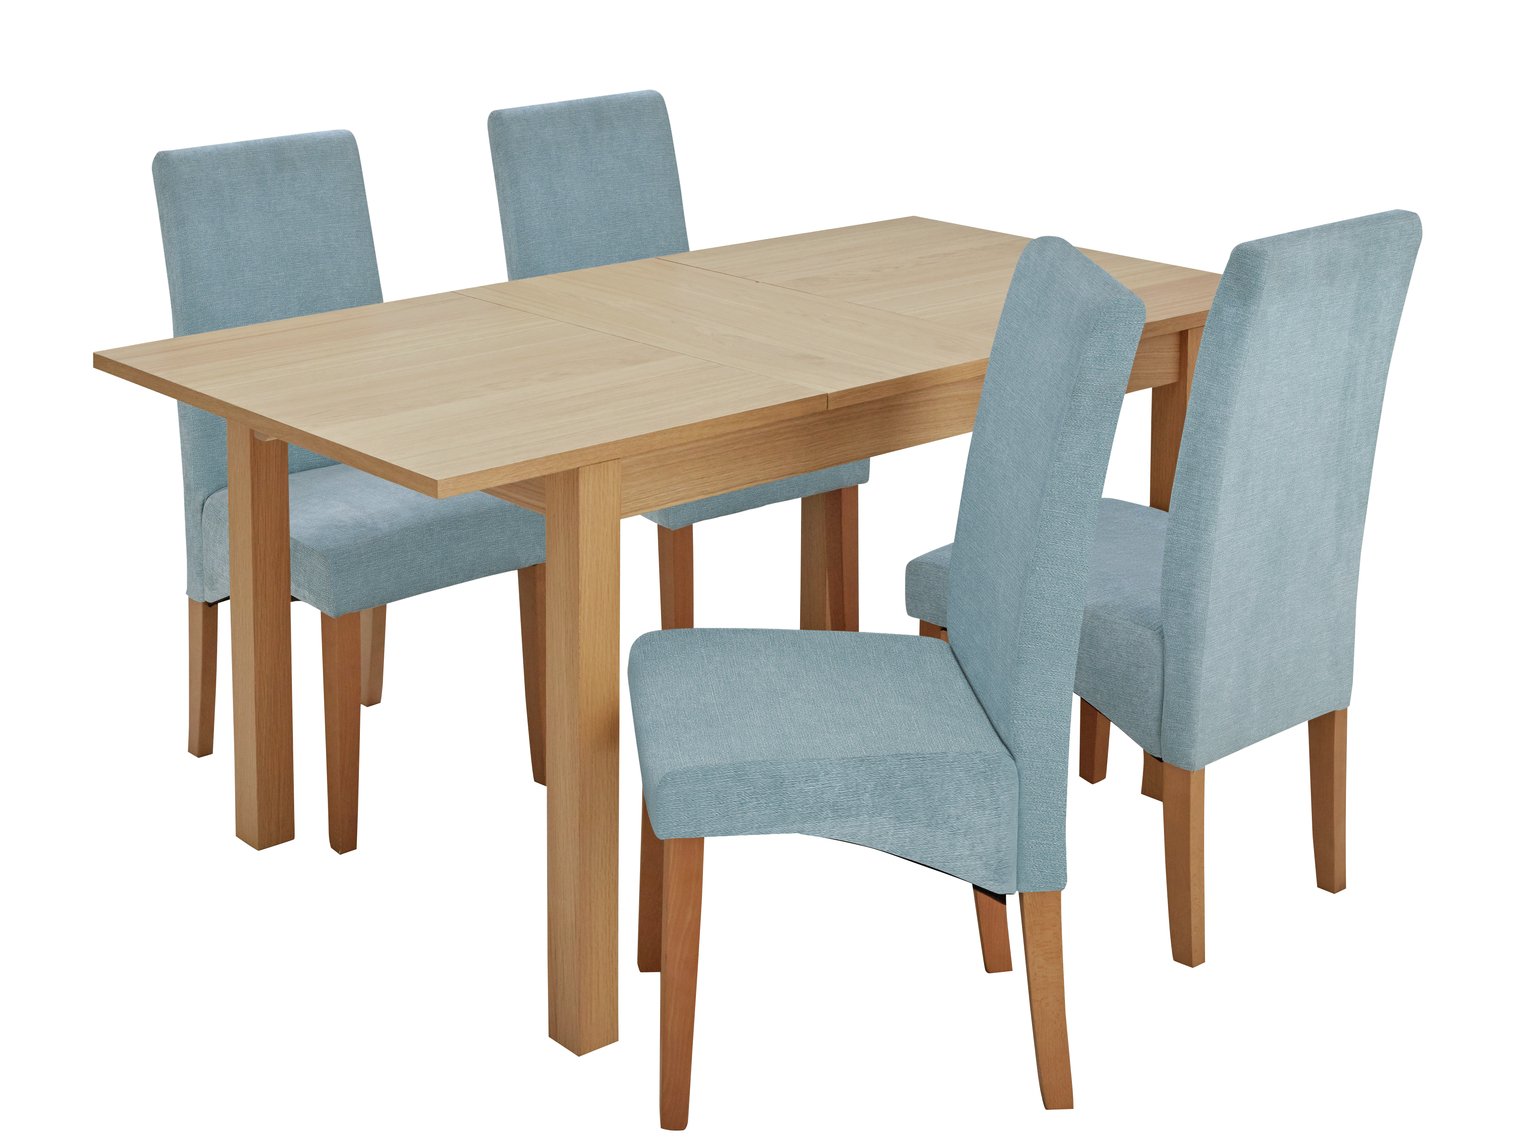 Argos Home Clifton Extendable Table & 4 Chairs - Duck Egg